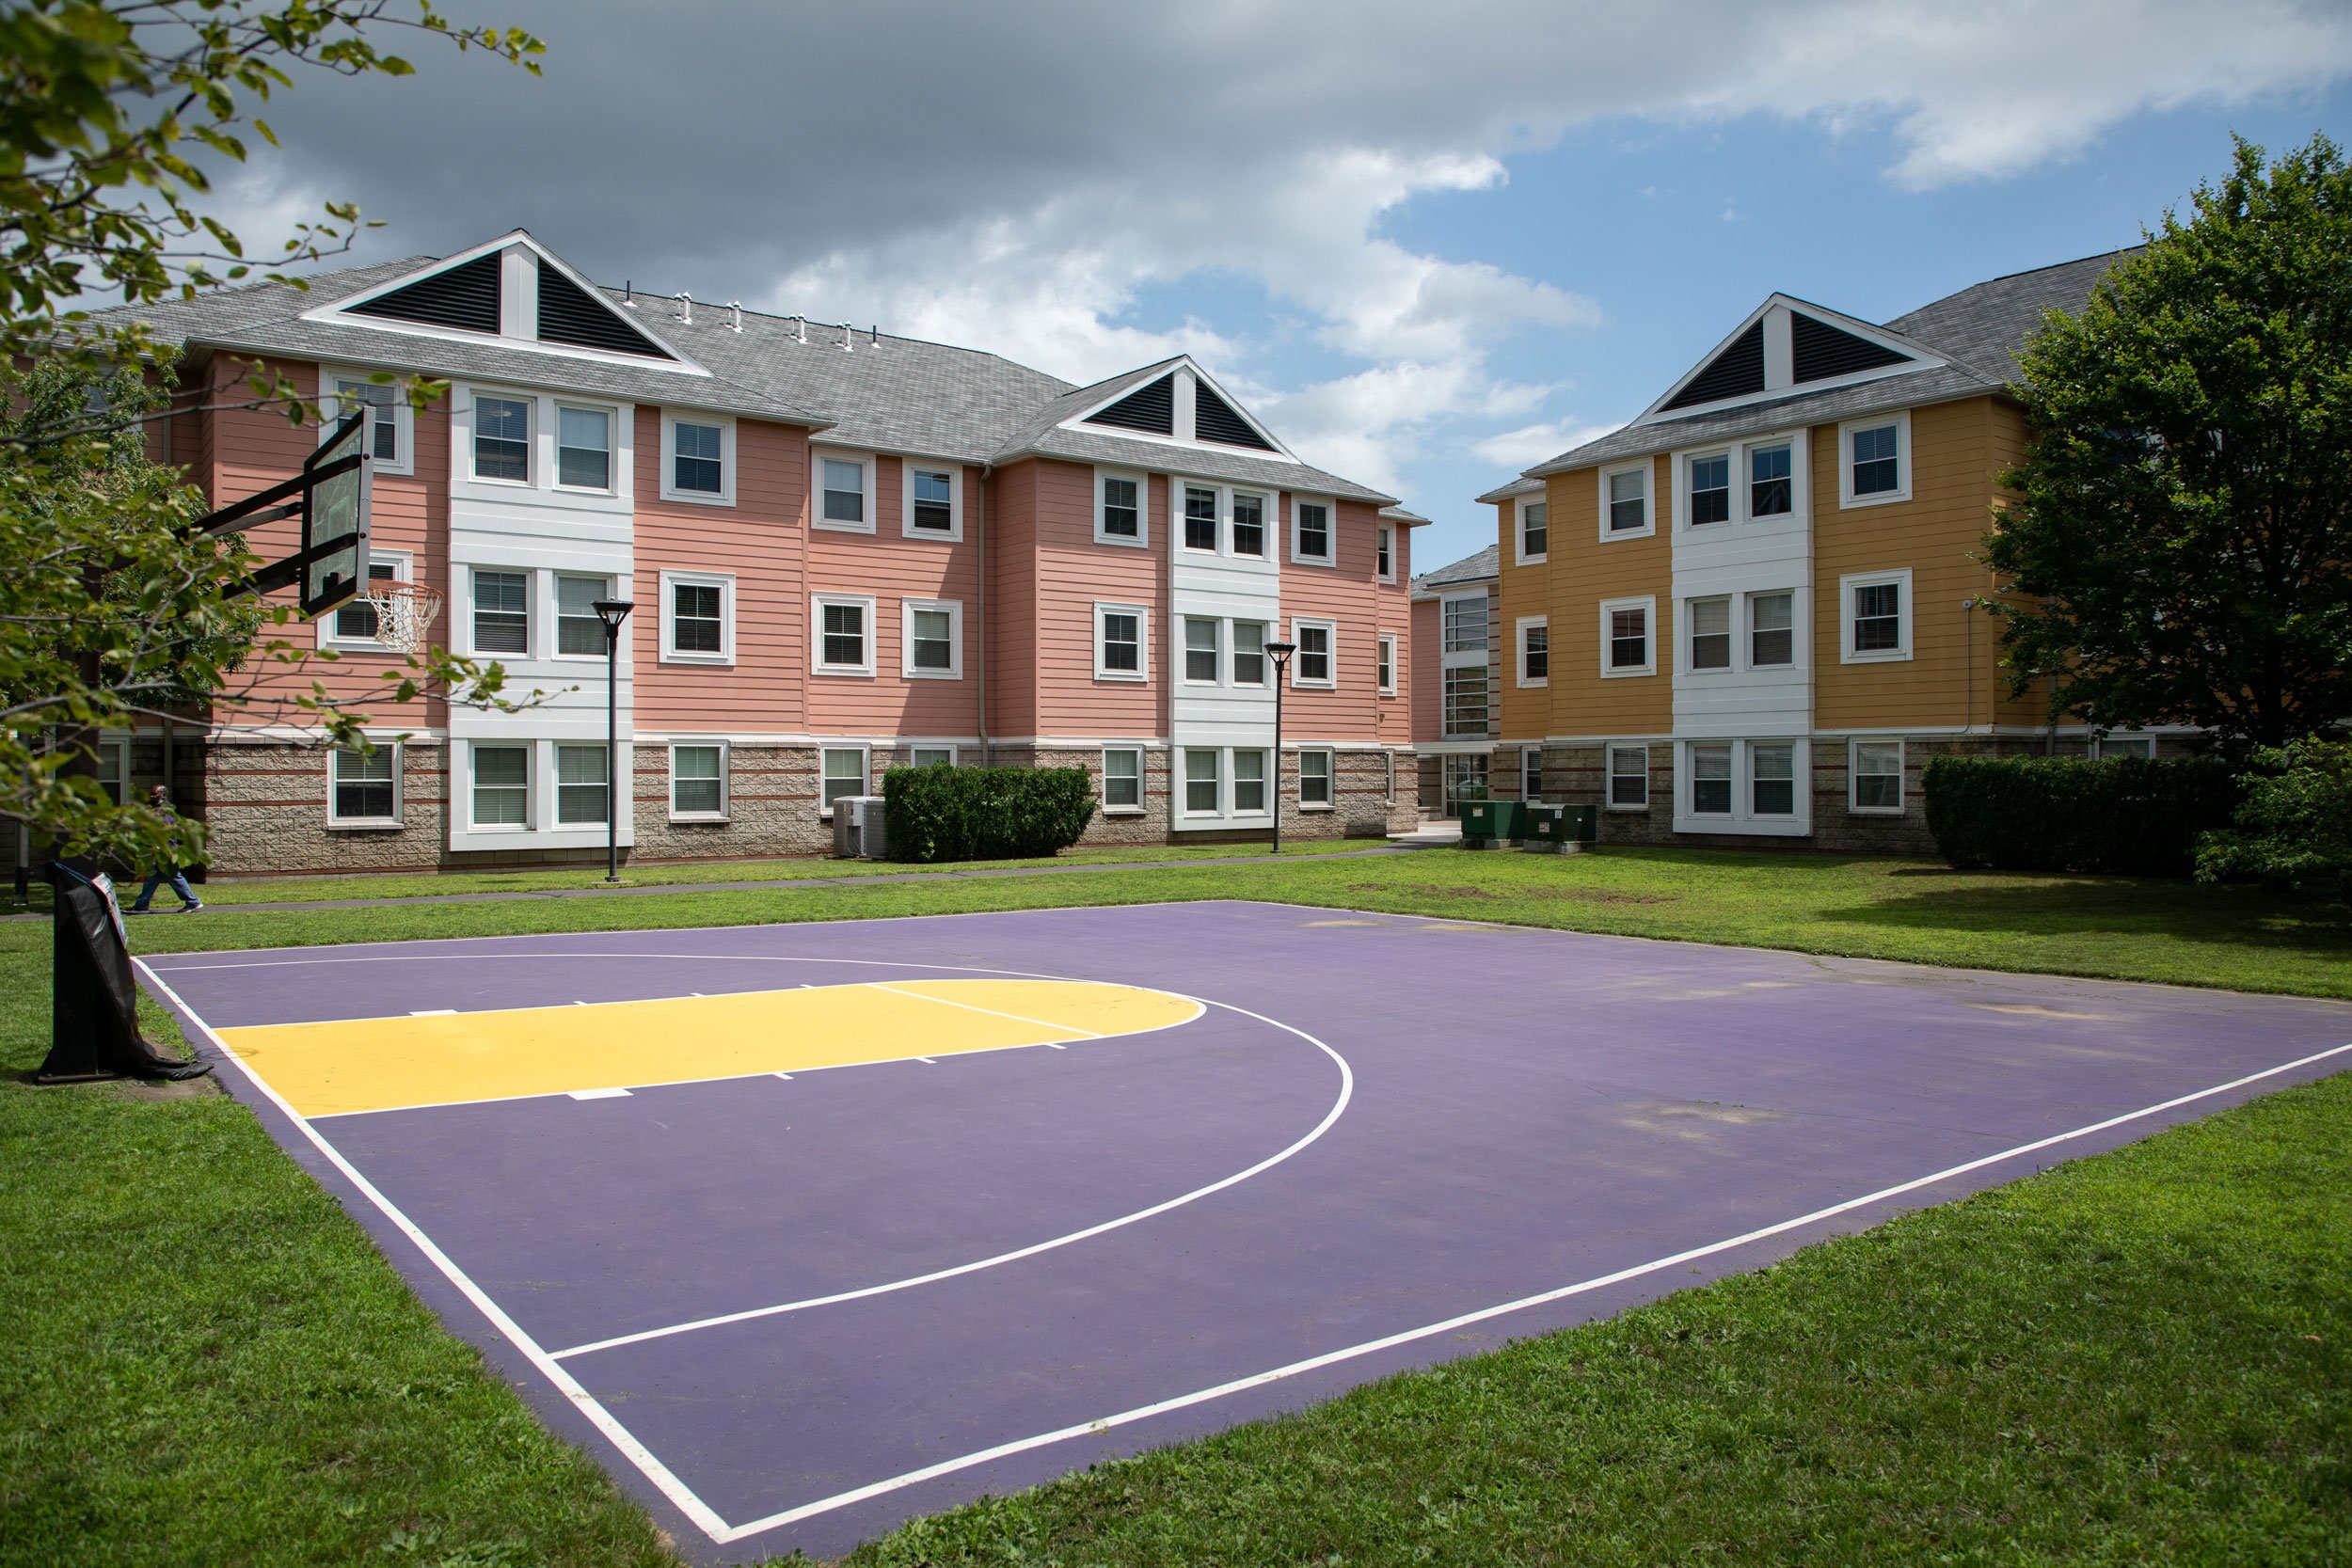 A purple and yellow half basketball court is visible in front of two Empire Commons buildings